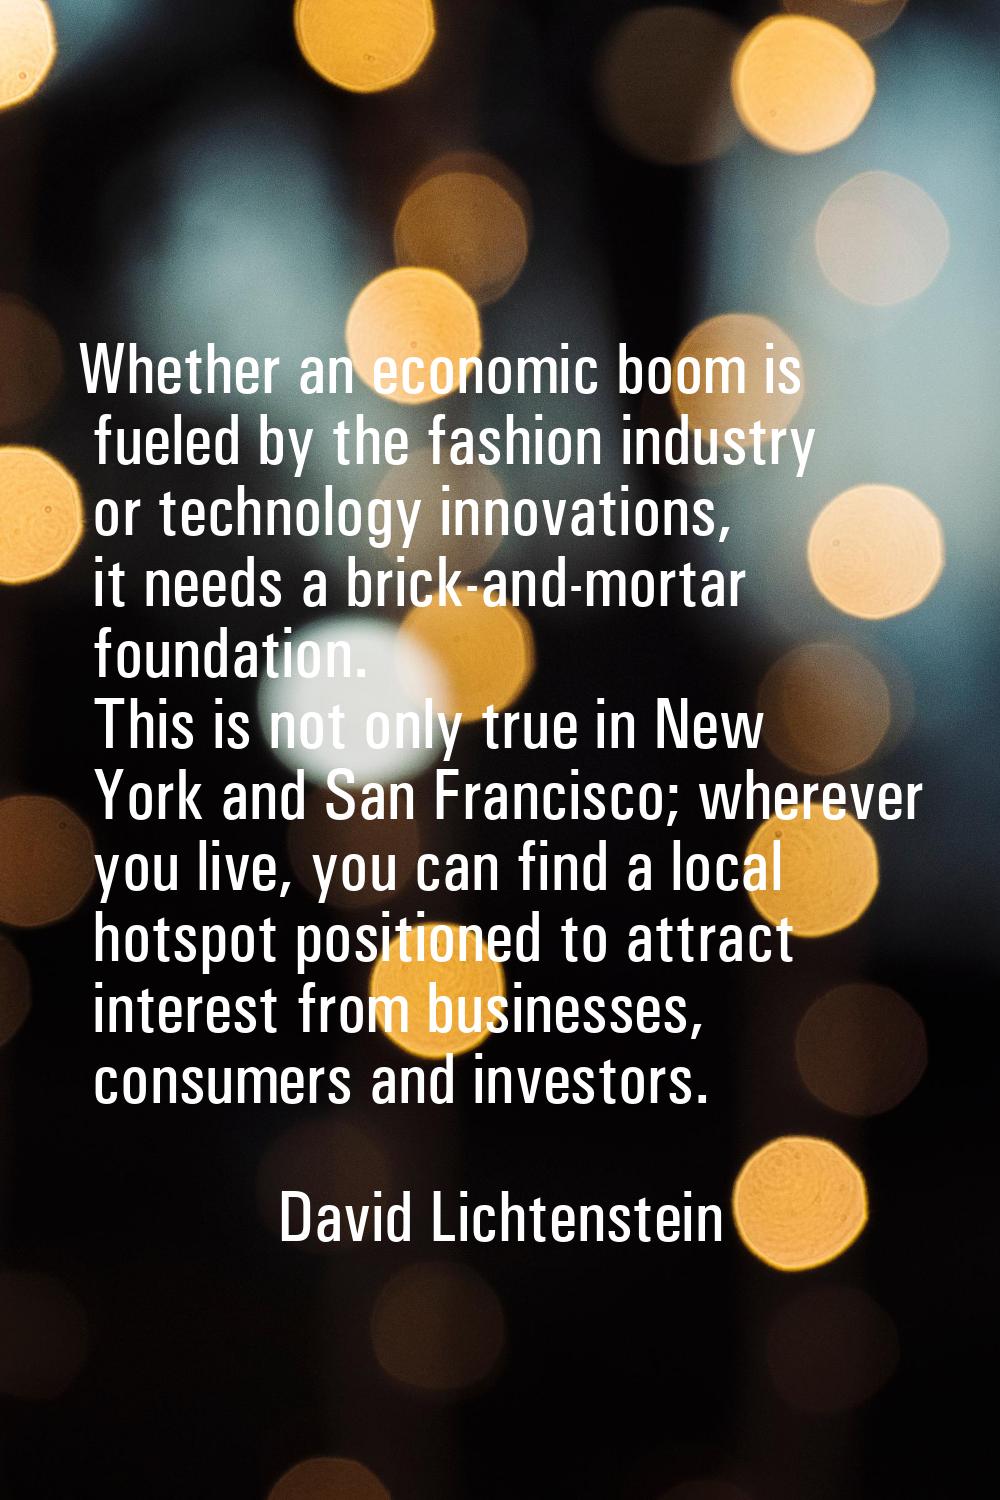 Whether an economic boom is fueled by the fashion industry or technology innovations, it needs a br